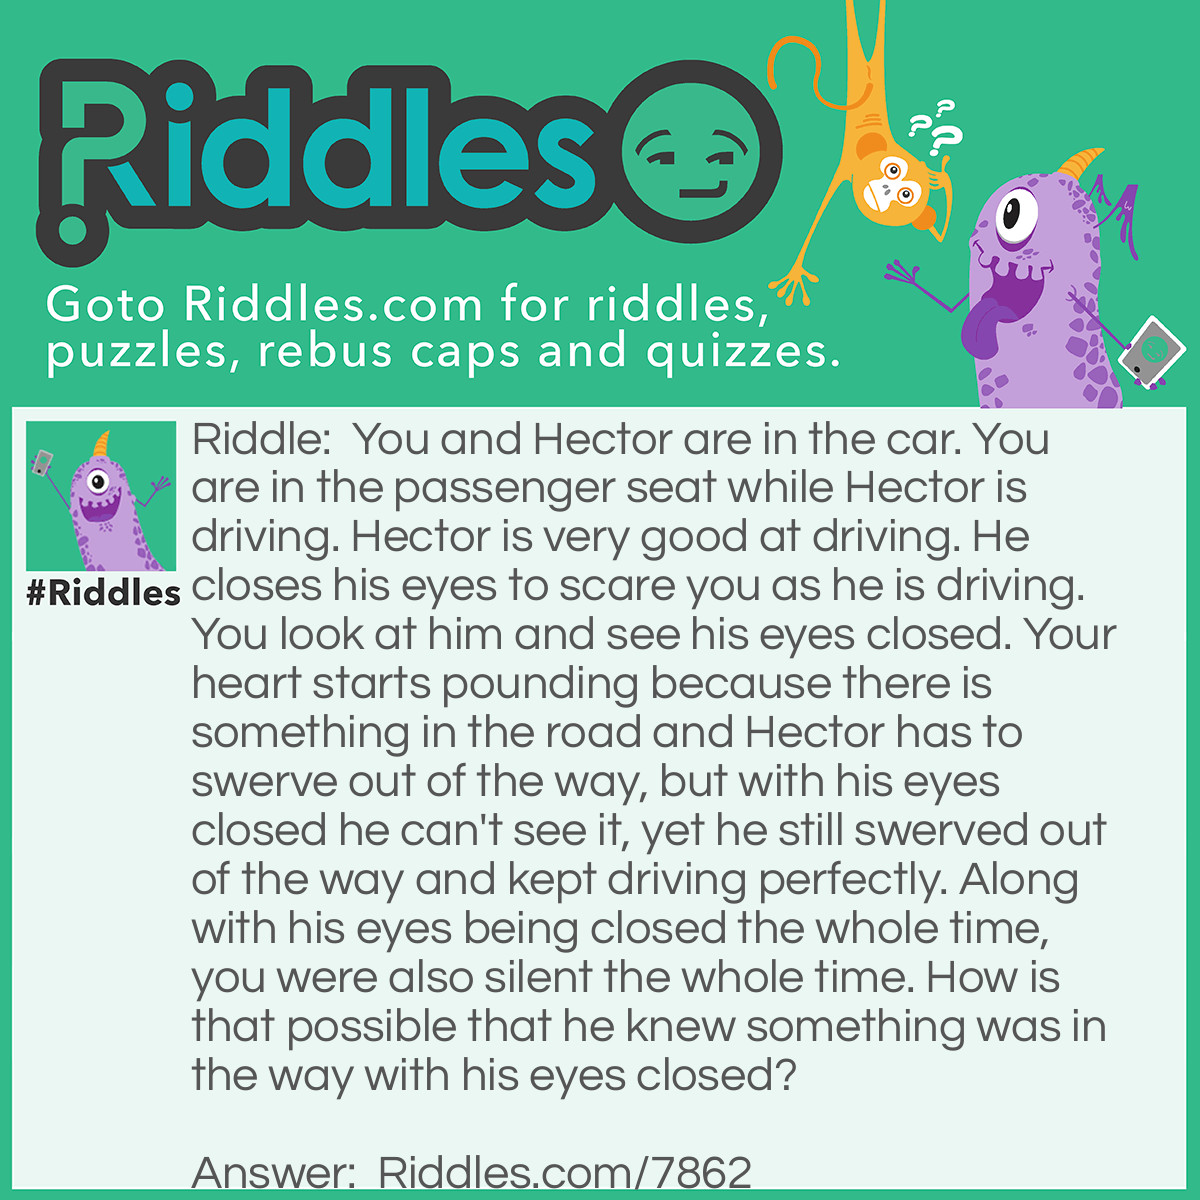 Riddle: You and Hector are in the car. You are in the passenger seat while Hector is driving. Hector is very good at driving. He closes his eyes to scare you as he is driving.You look at him and see his eyes closed. Your heart starts pounding because there is something in the road and Hector has to swerve out of the way, but with his eyes closed he can't see it, yet he still swerved out of the way and kept driving perfectly. Along with his eyes being closed the whole time, you were also silent the whole time. How is that possible that he knew something was in the way with his eyes closed? Answer: Since you are in the passenger seat, when you look at Hector all you see is the right side of his face, only his right eye. He had his right eye closed and his left eye opened. You just could't see it.